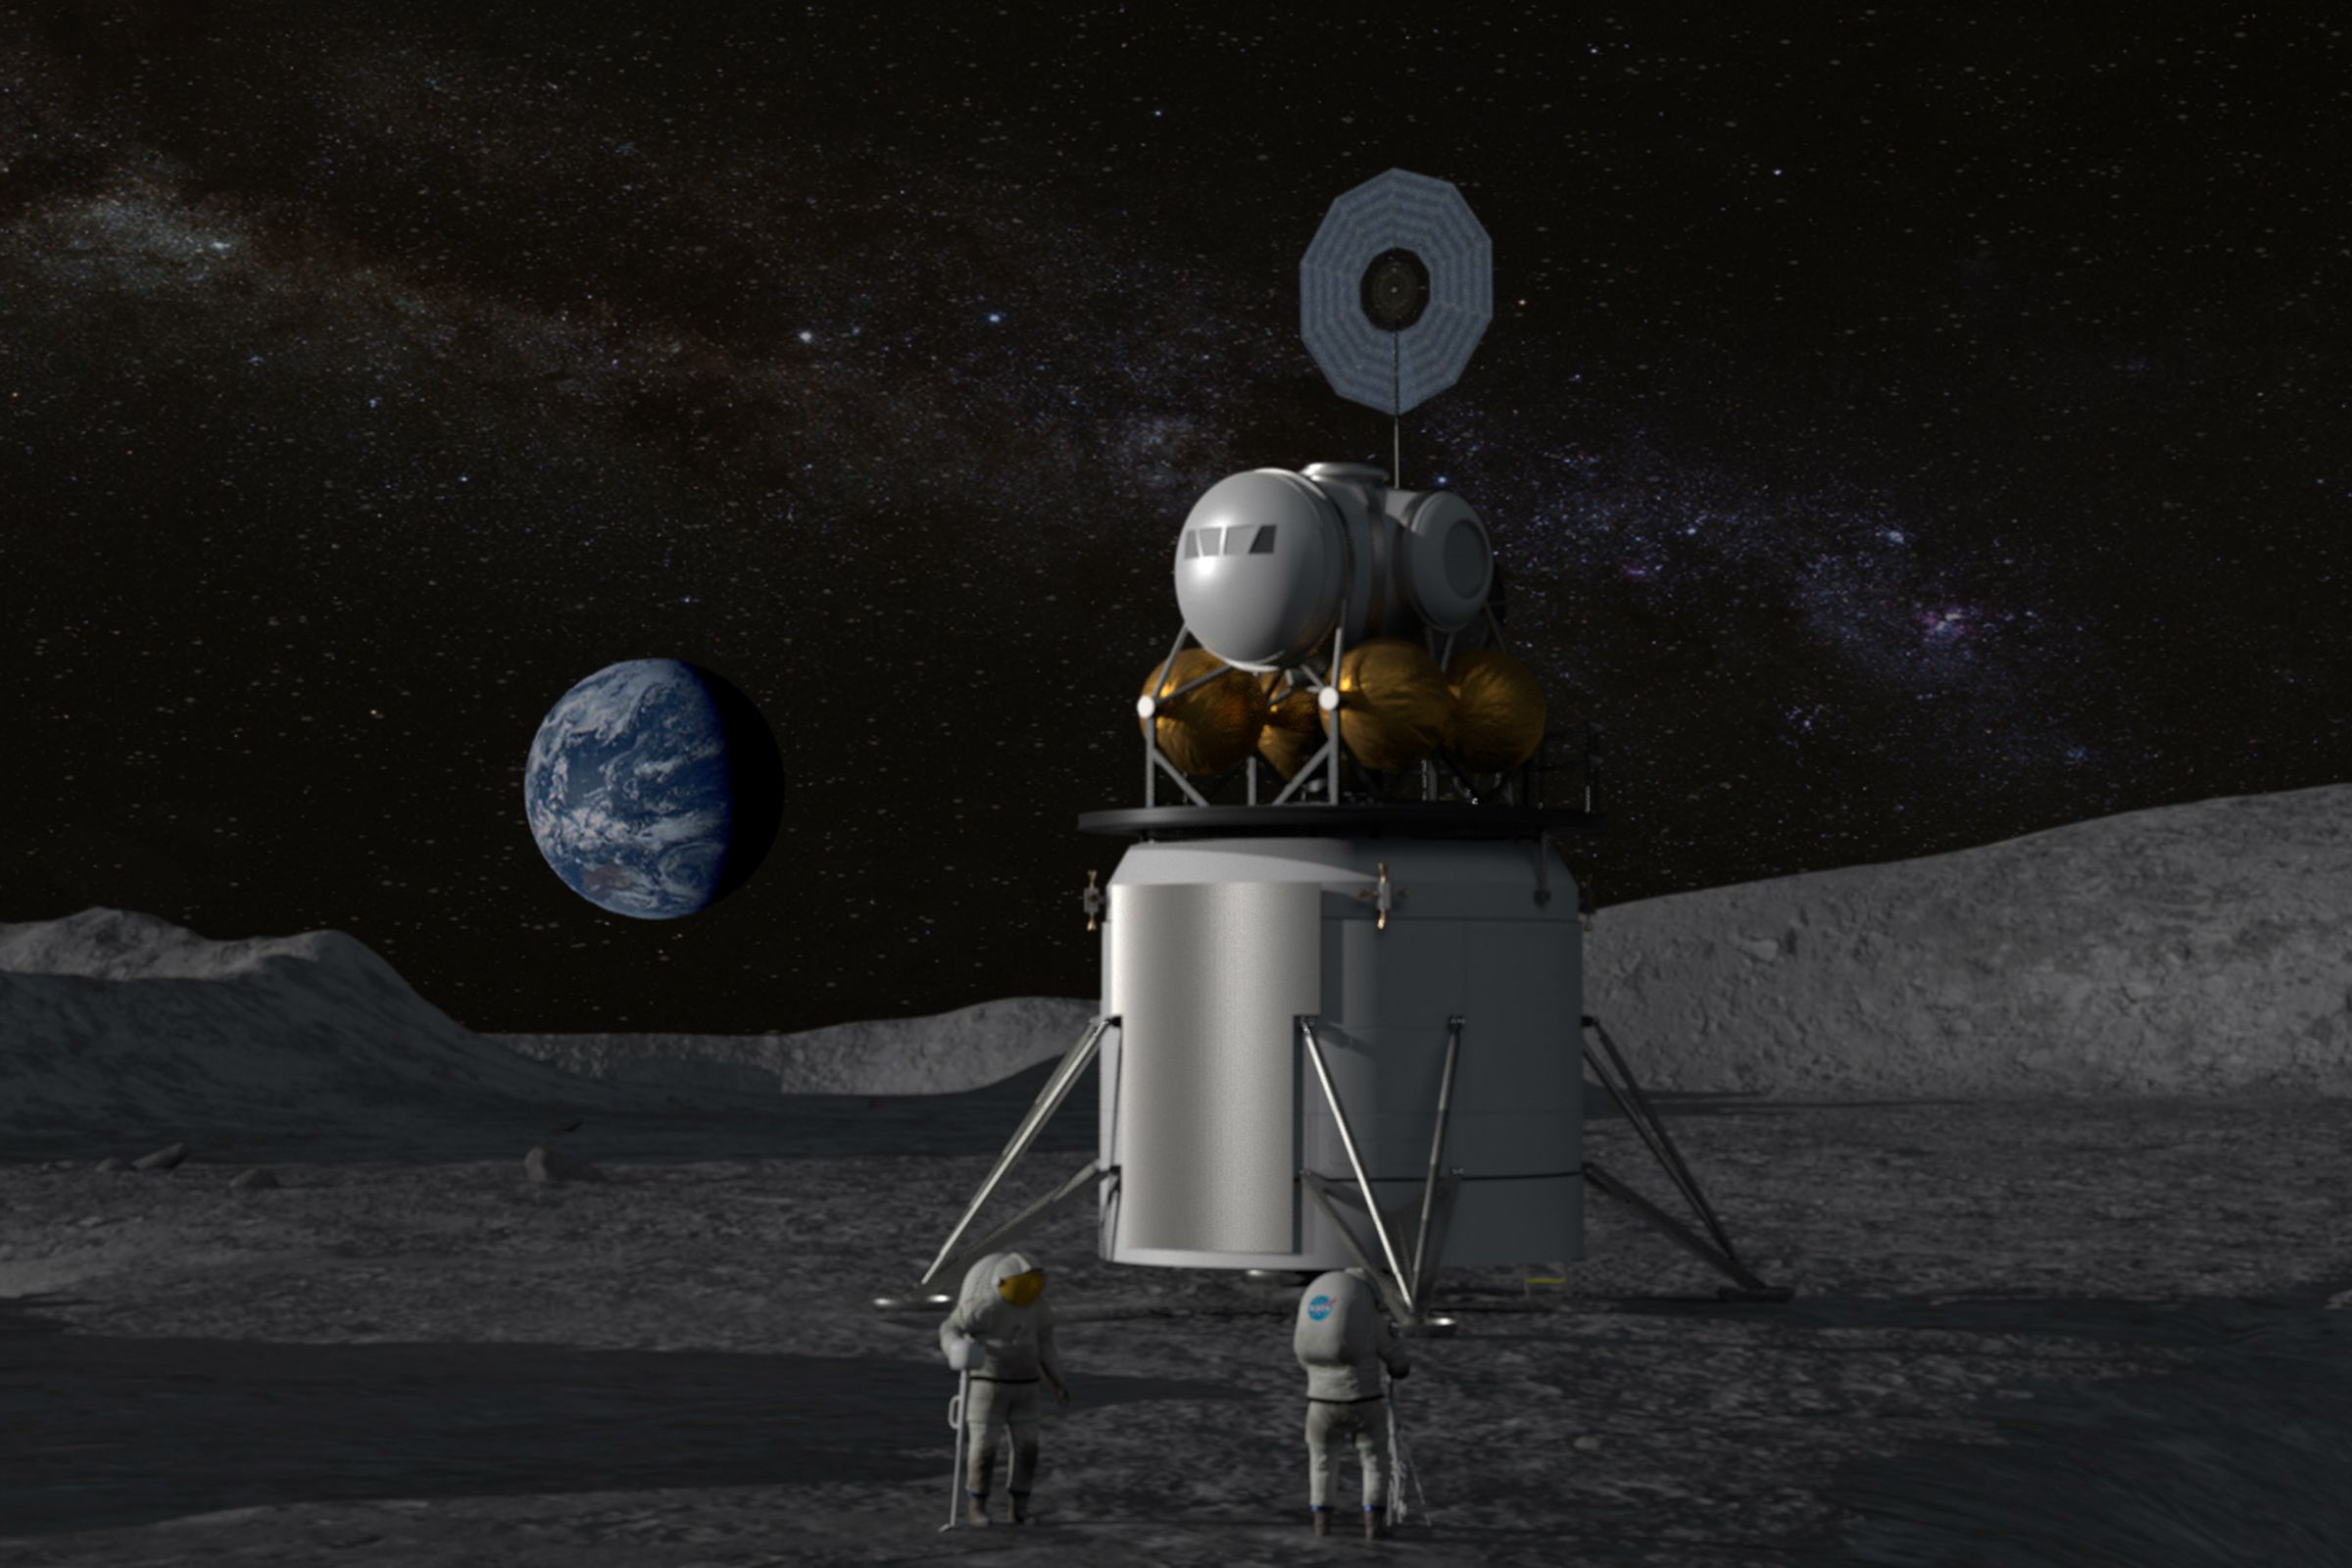 An artistic rendering of a lunar lander on the surface of the Moon.